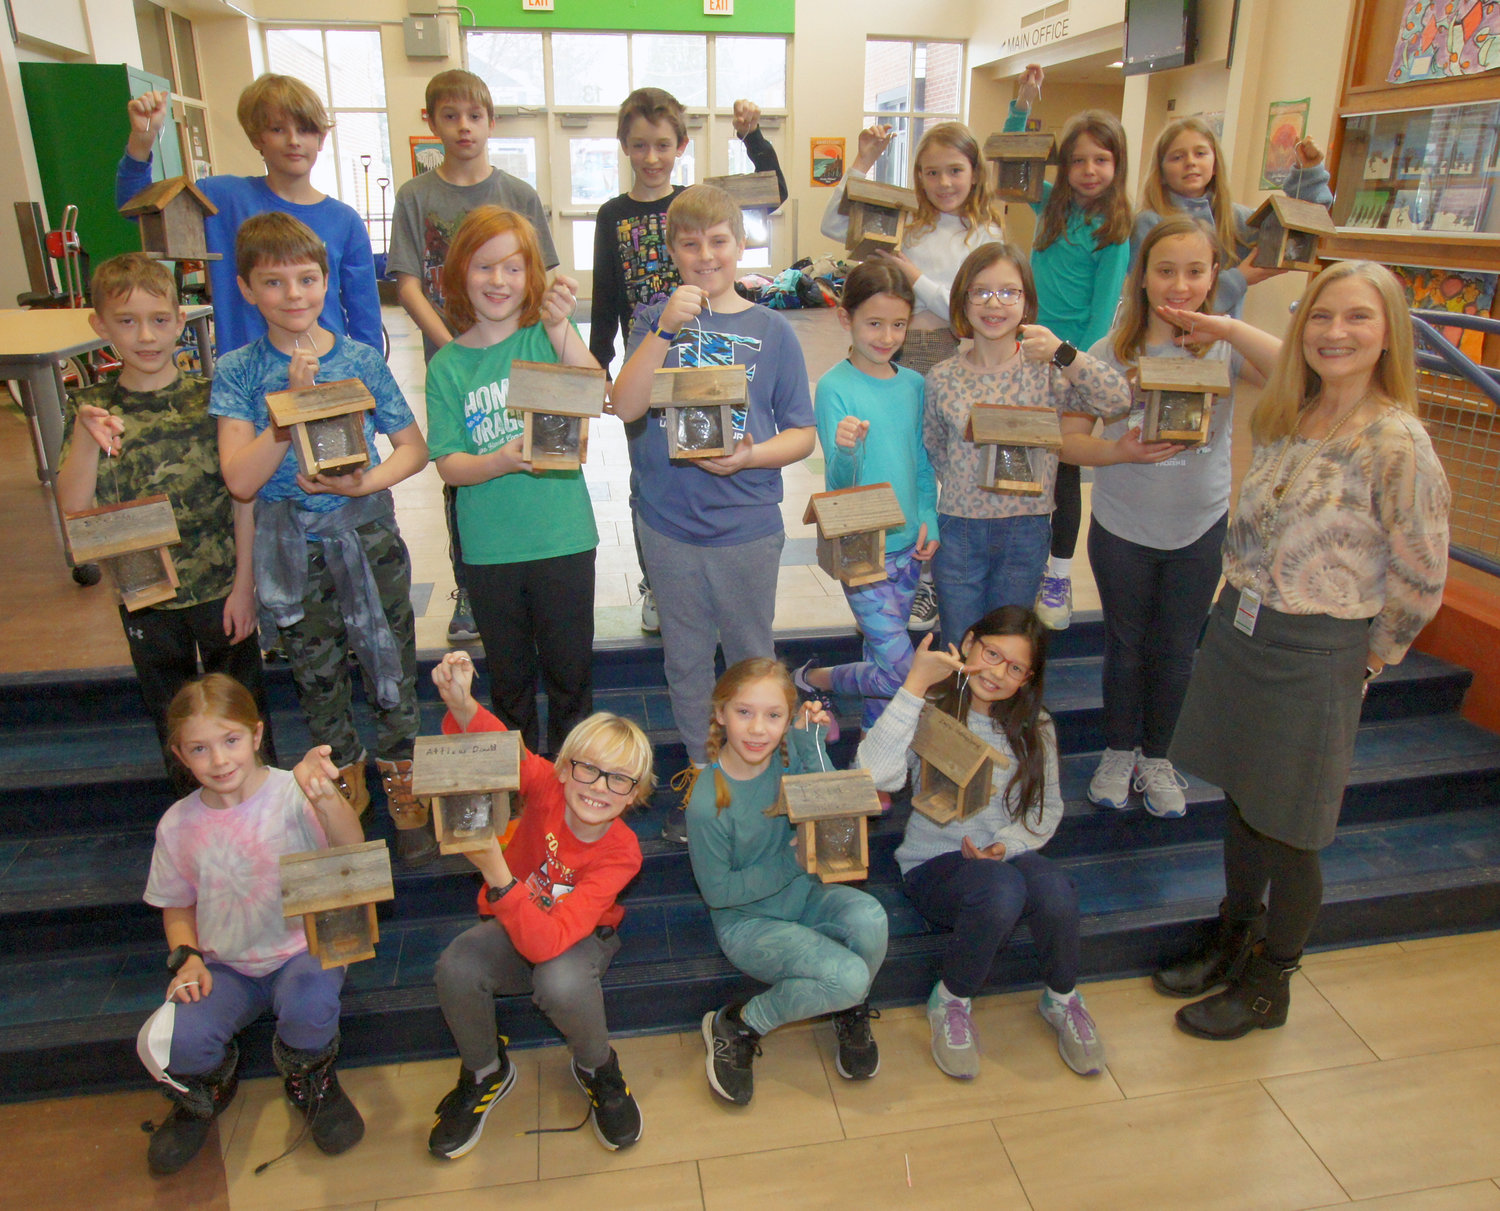 Amy O'Hara's 4th Grade Lake Harriet Community School class proudly posed with their complete birdfeeders. (Photo by Terry Faust)